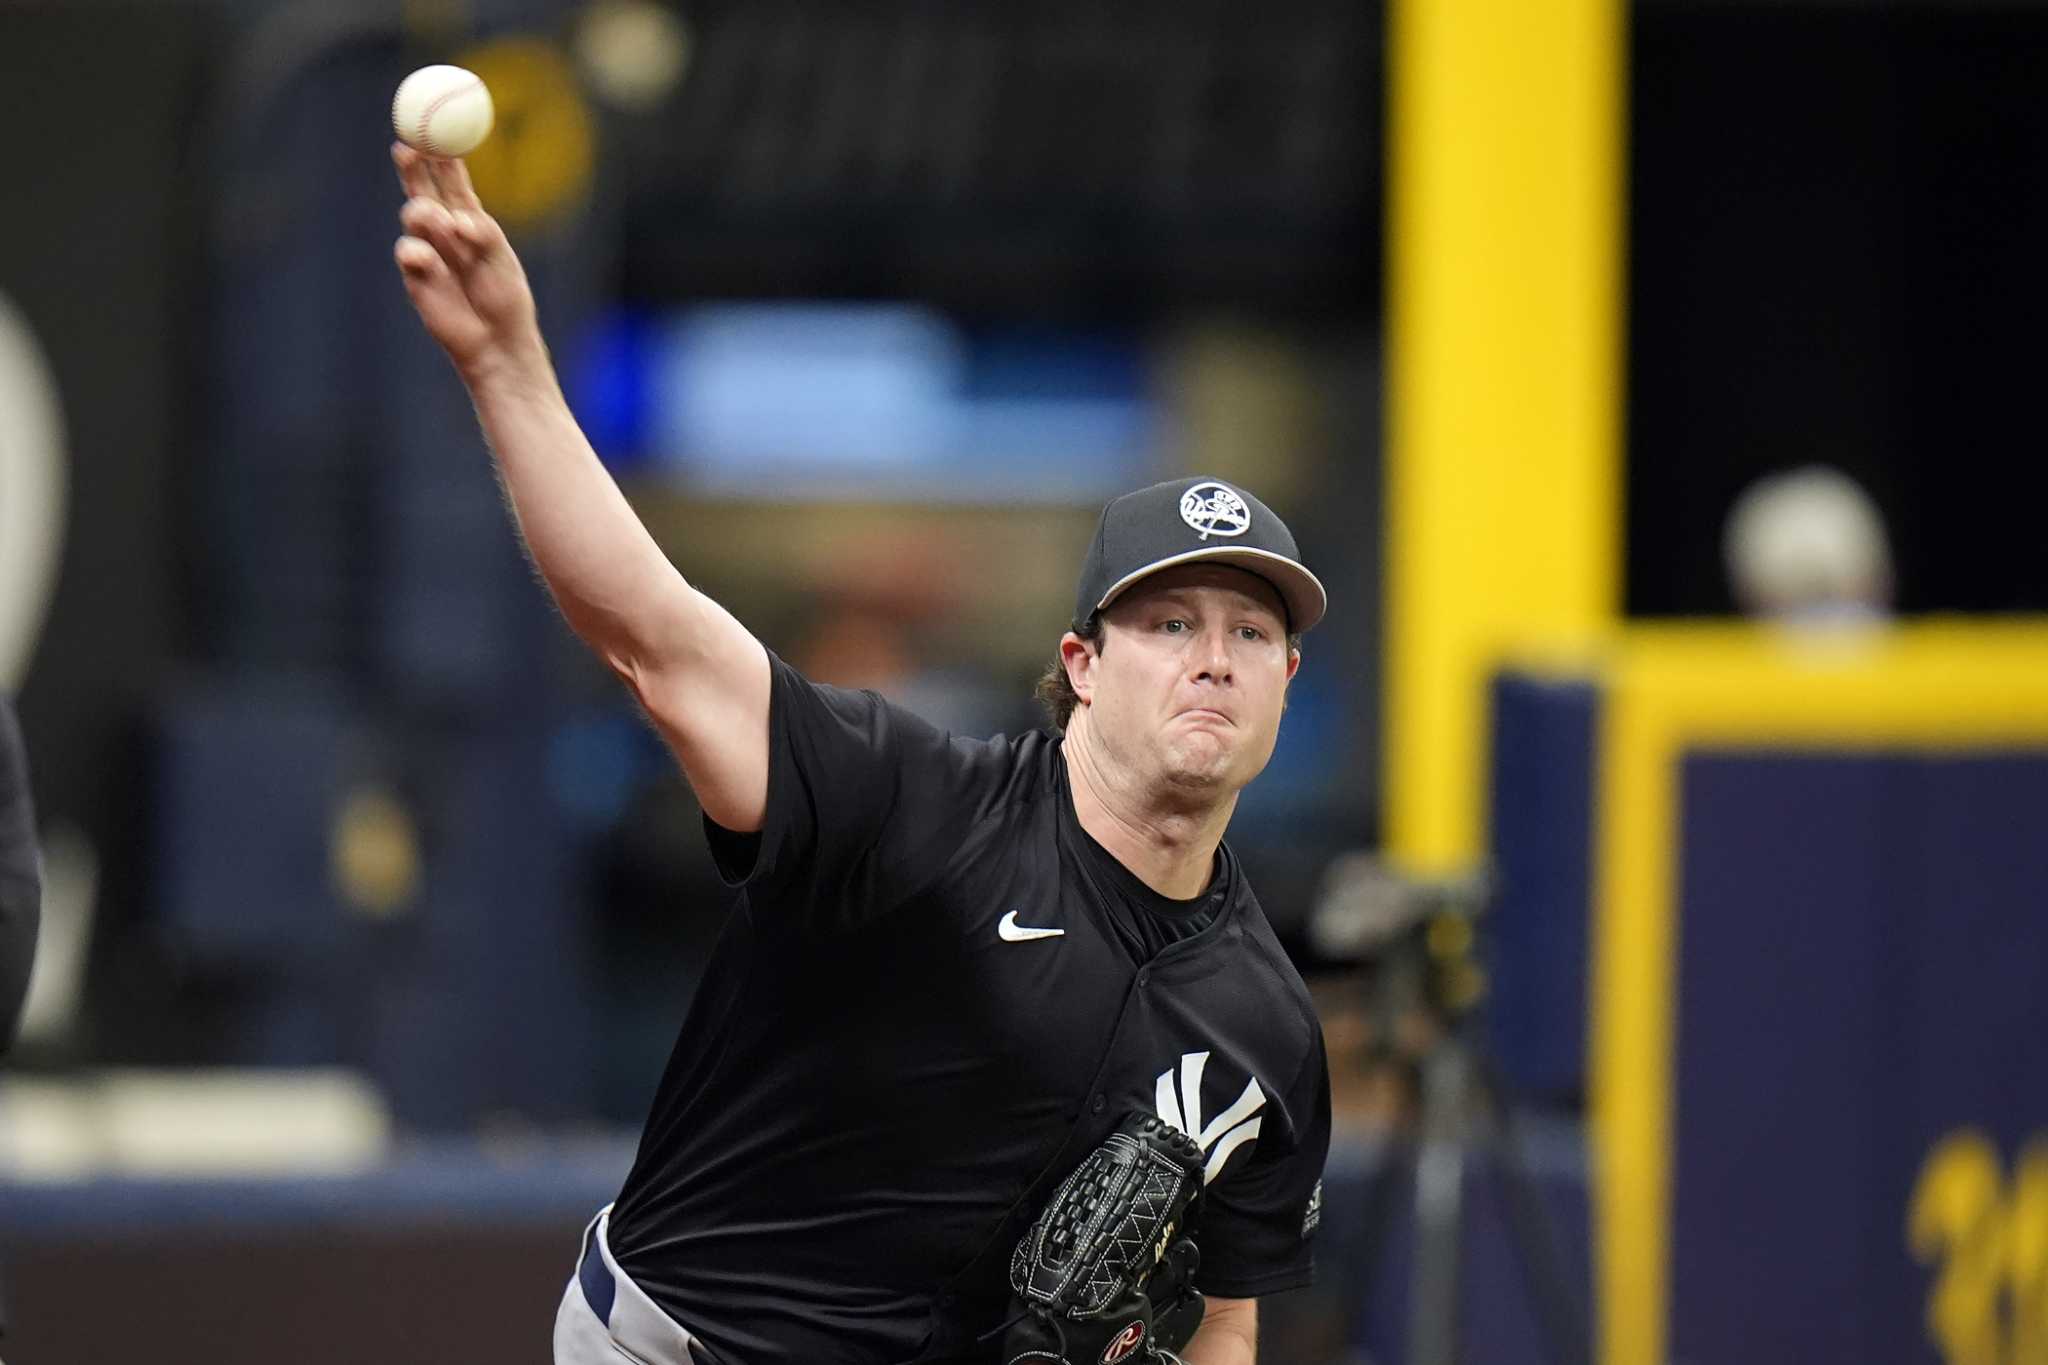 Yankees ace Gerrit Cole to begin rehab assignment Tuesday at Double-A